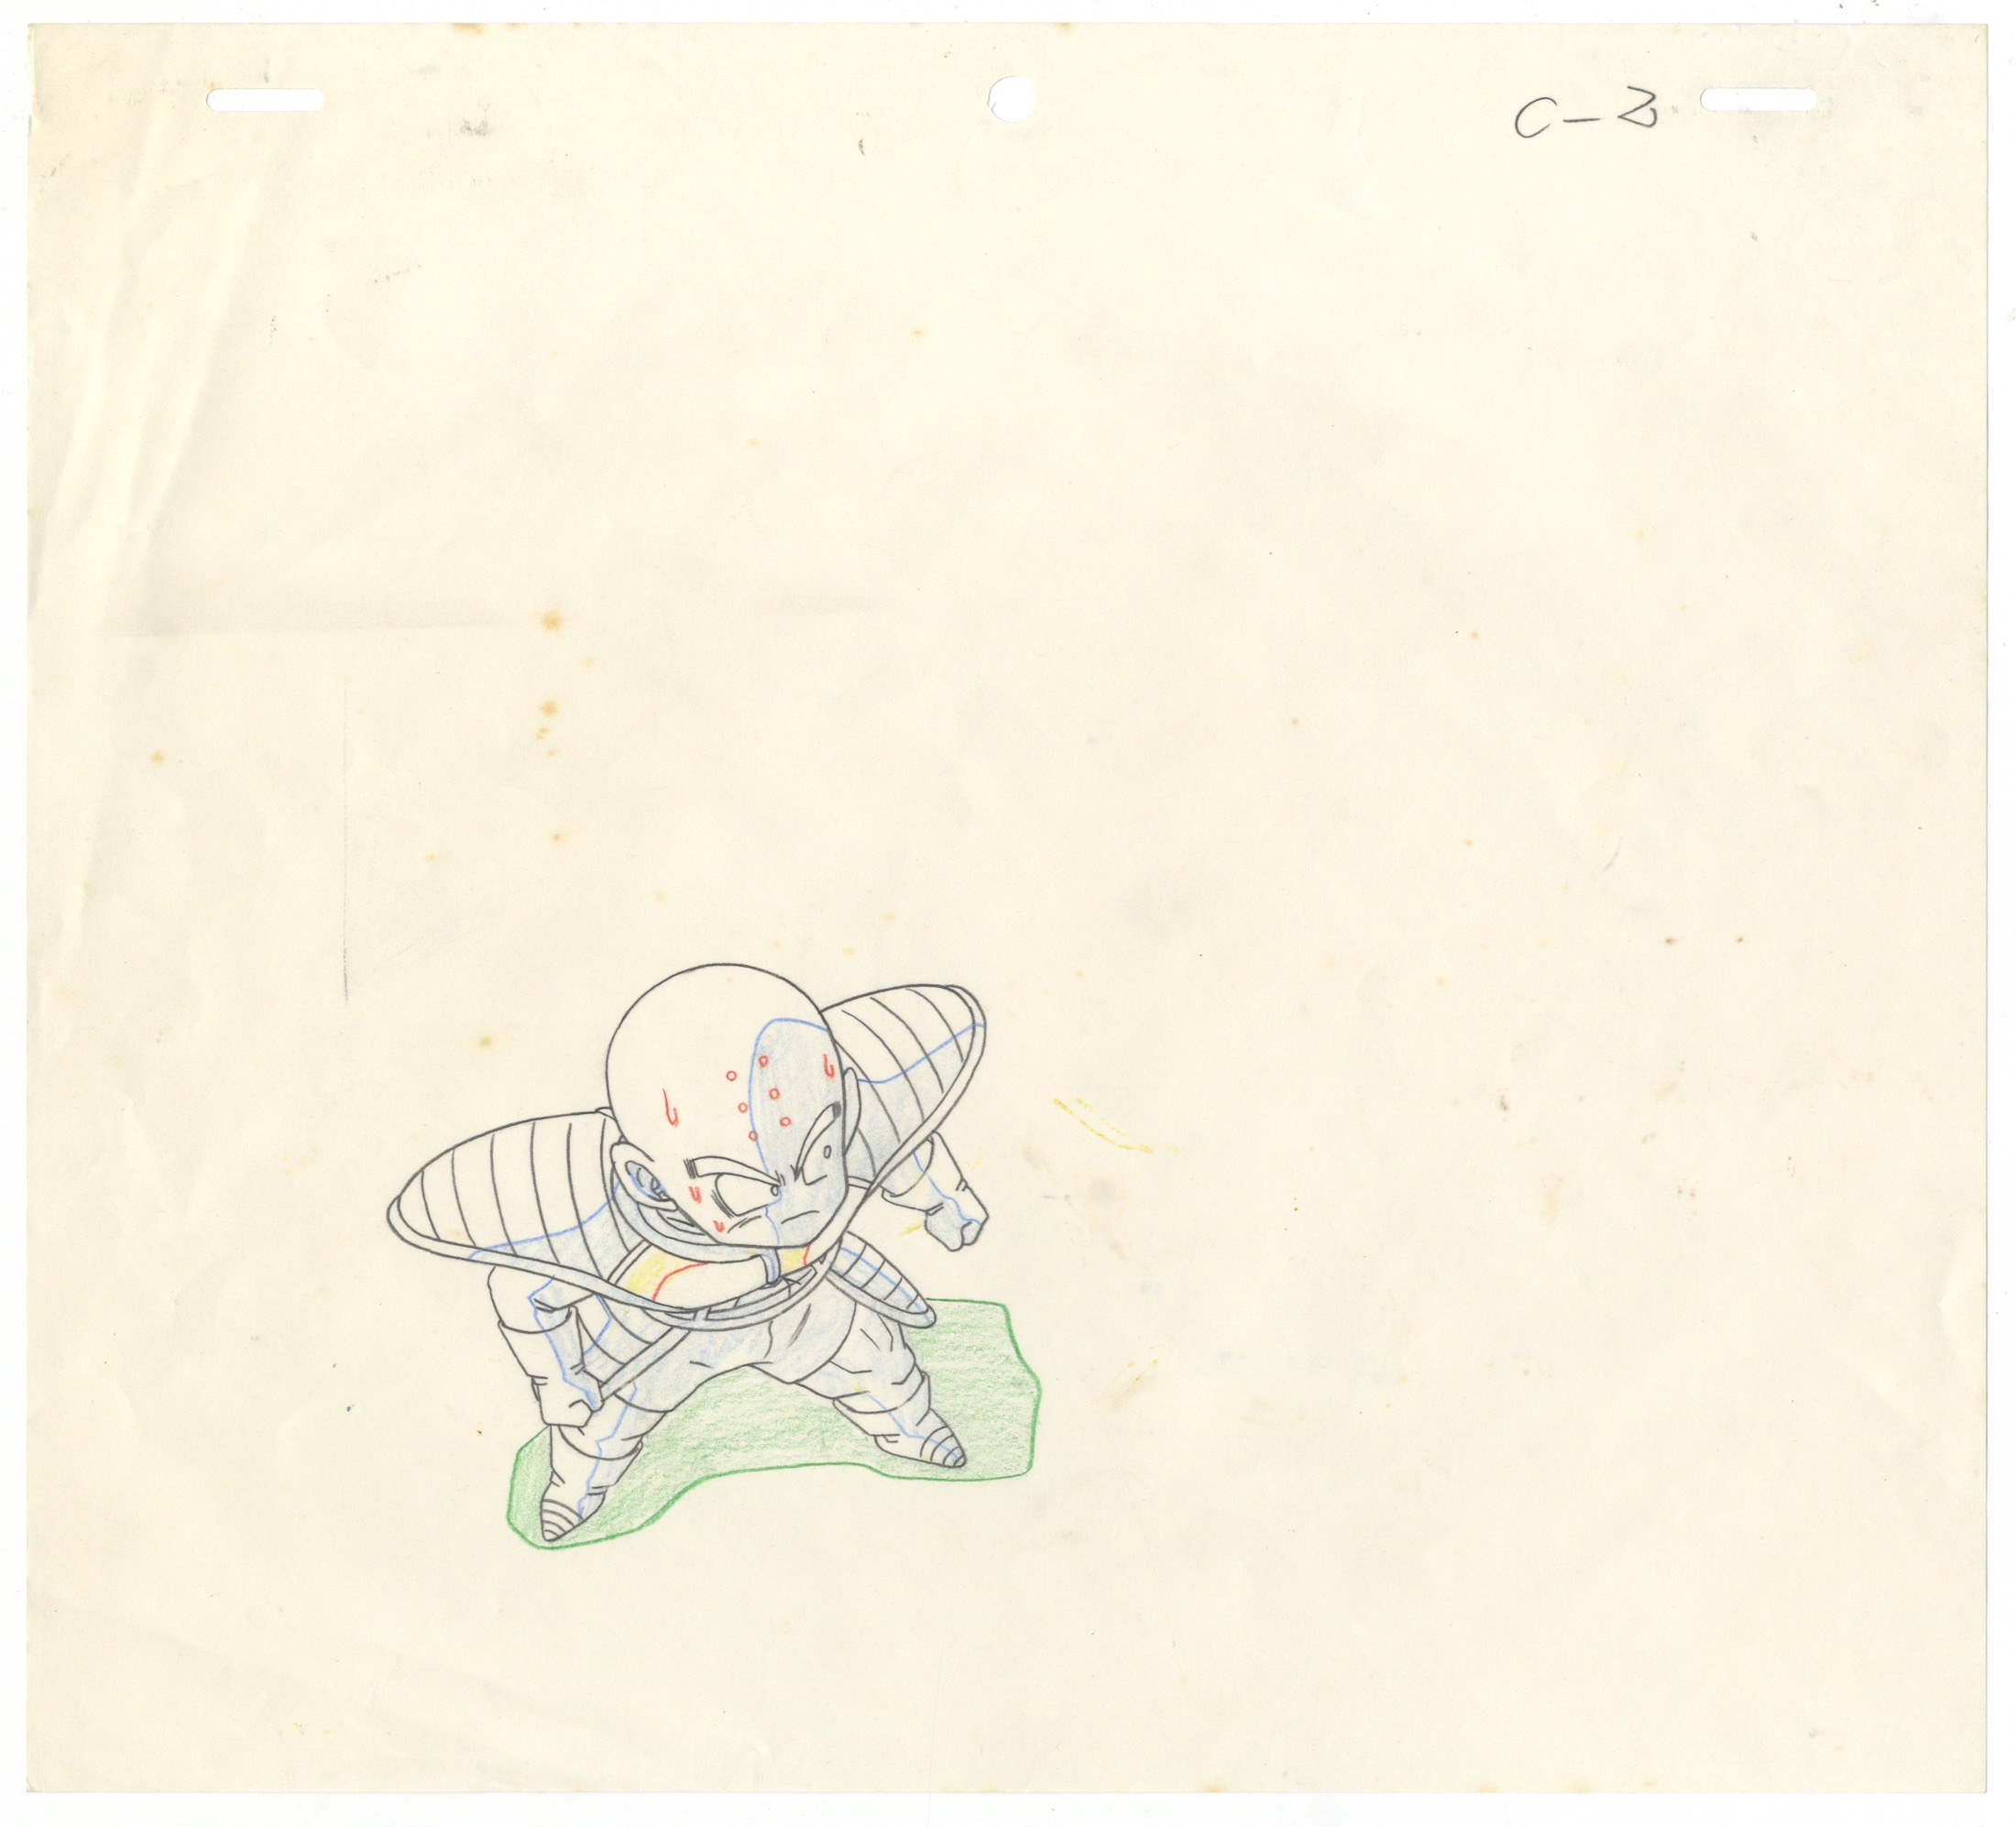 Krillin and Piccolo, Dragon Ball Z, Anime Production Cel - Image 4 of 4